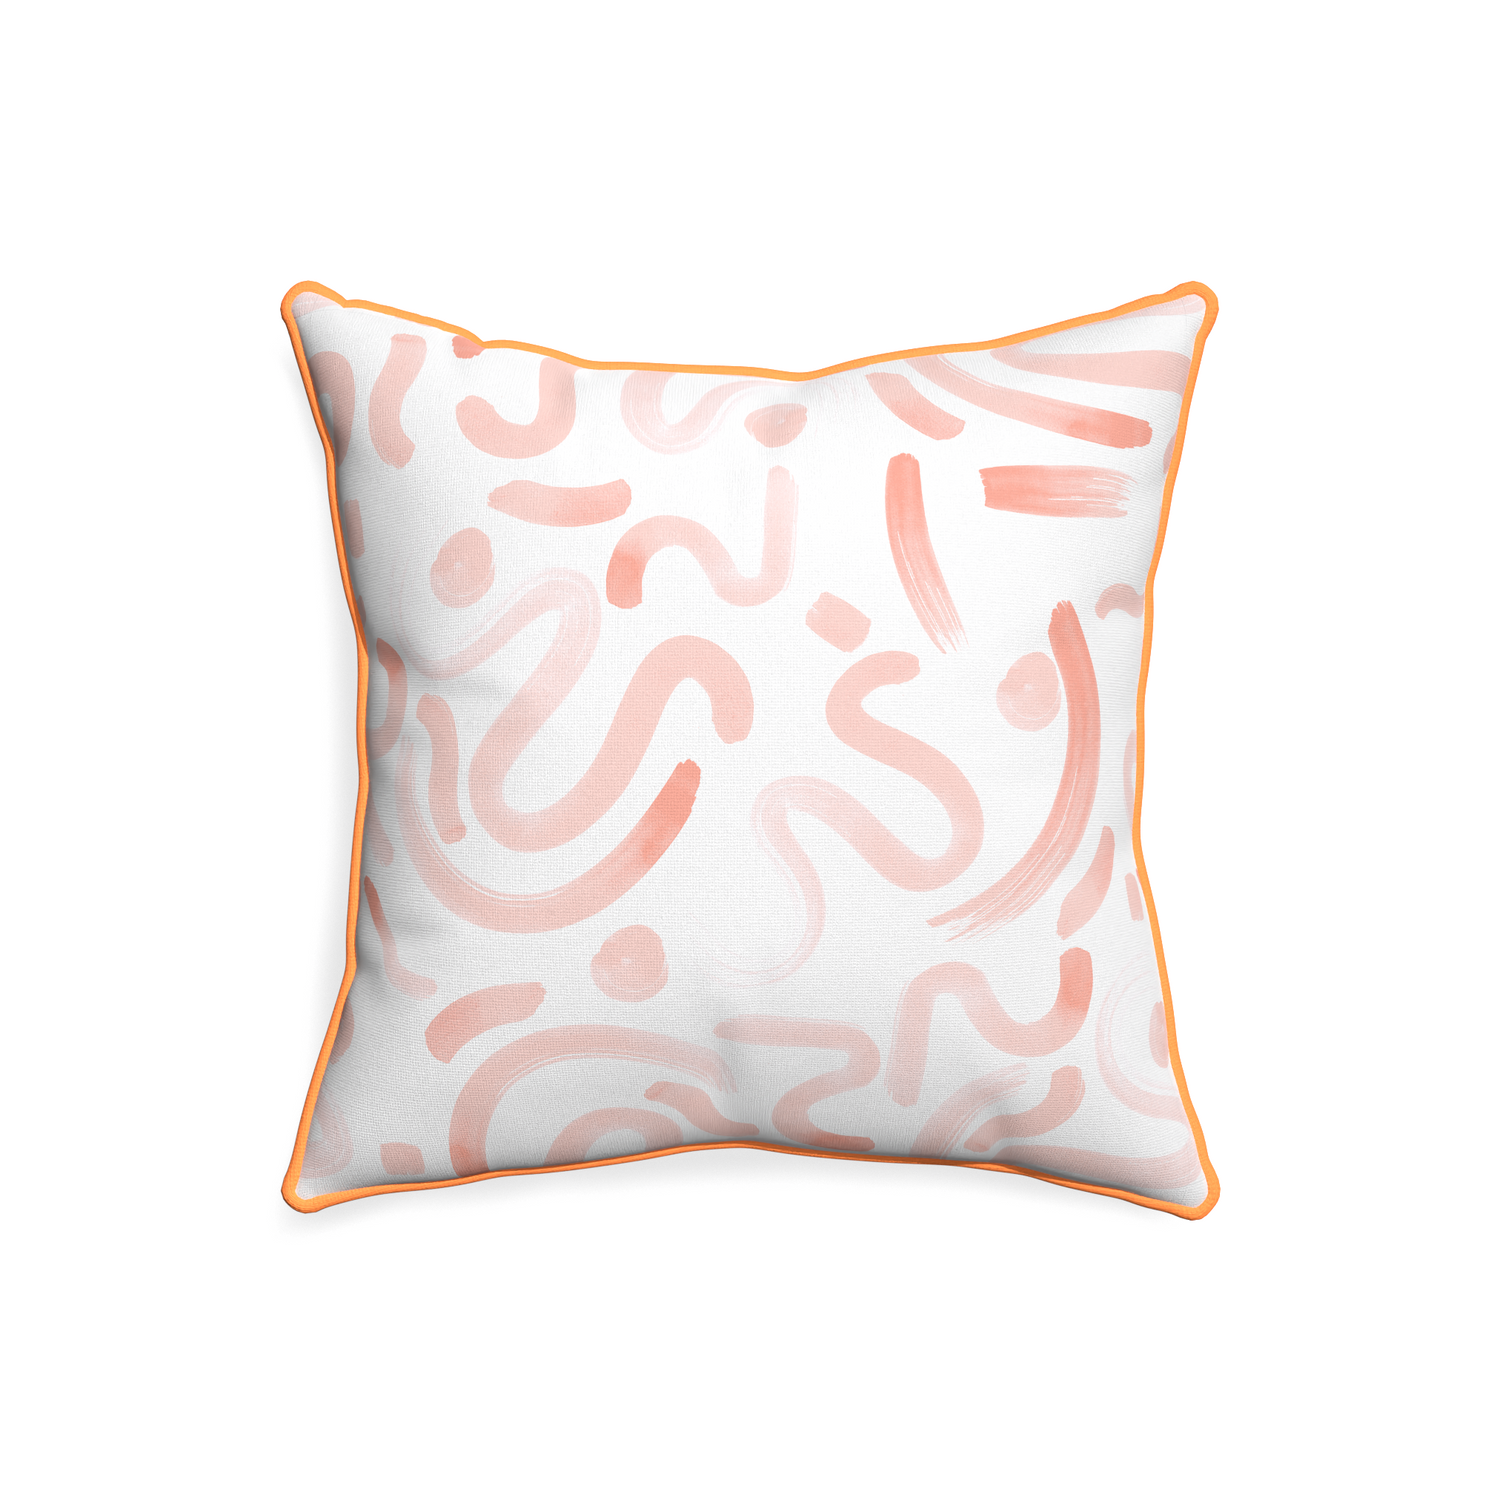 20-square hockney pink custom pink graphicpillow with clementine piping on white background